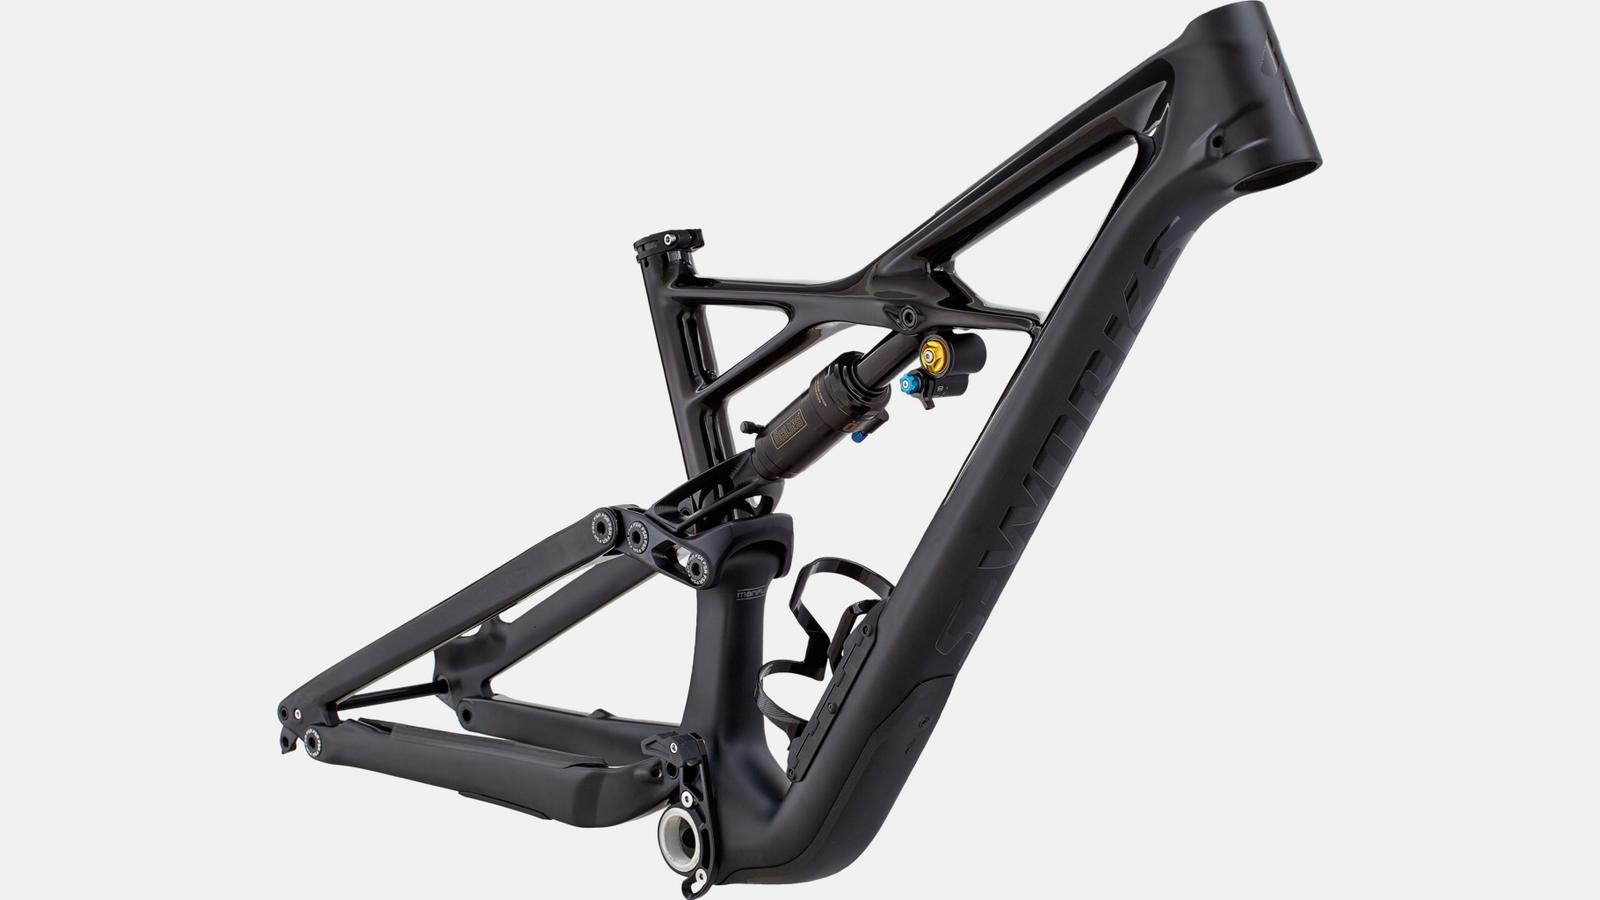 Paint for 2018 Specialized S-Works Enduro 27.5 Frame - Gloss Black